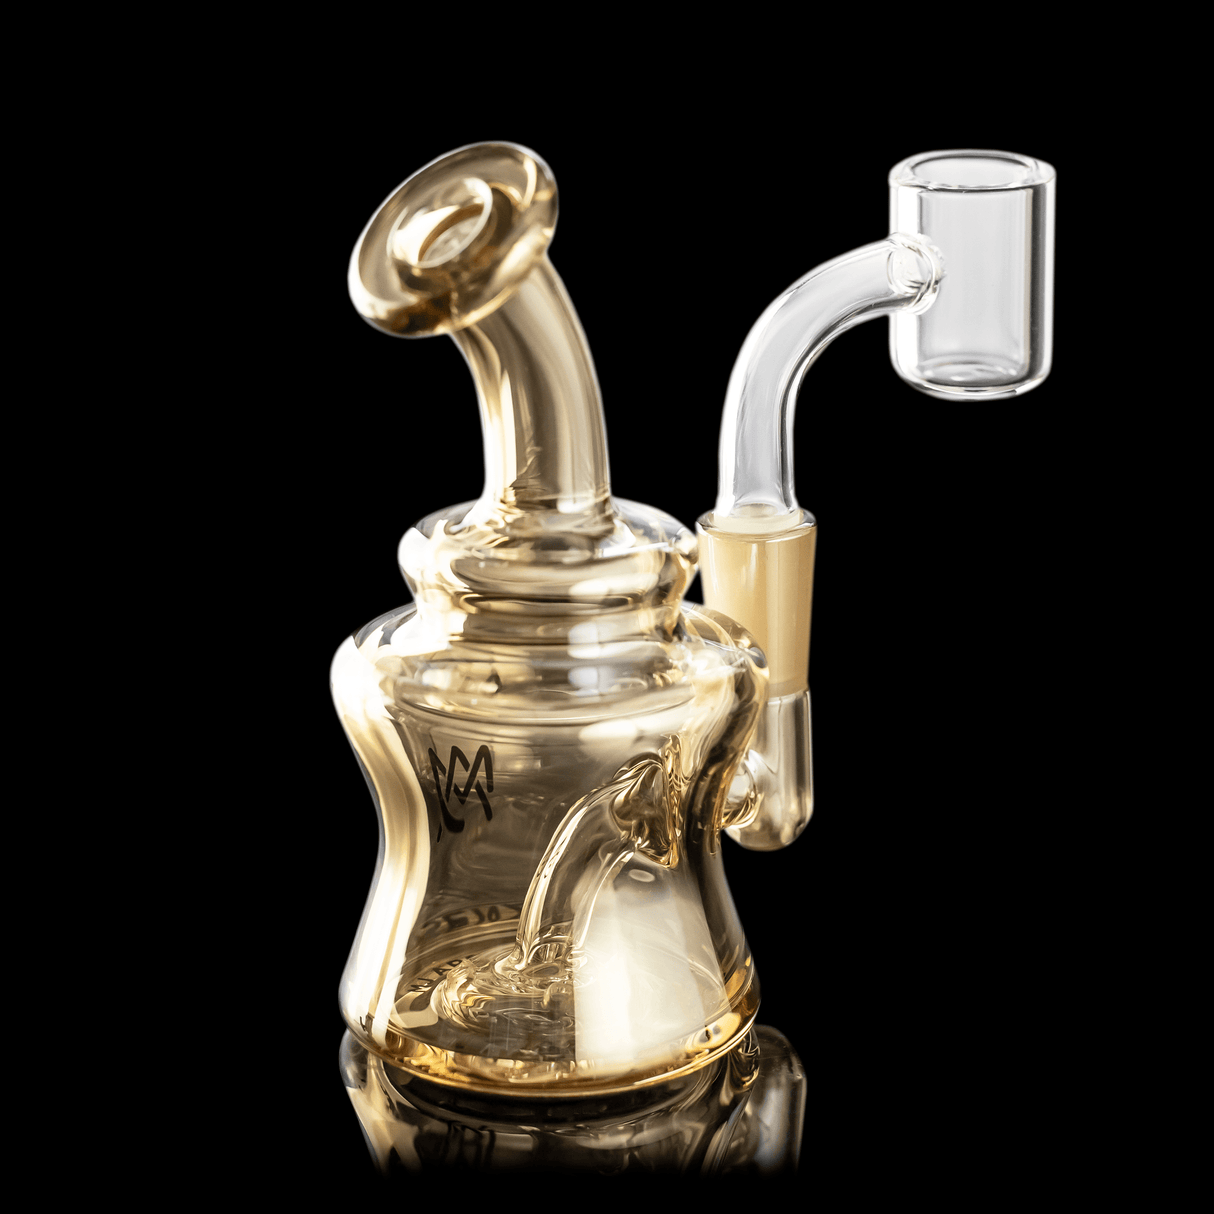 MJ Arsenal Gold Jammer Mini Rig LE with Banger Hanger, 90 Degree Joint, and Portable Design